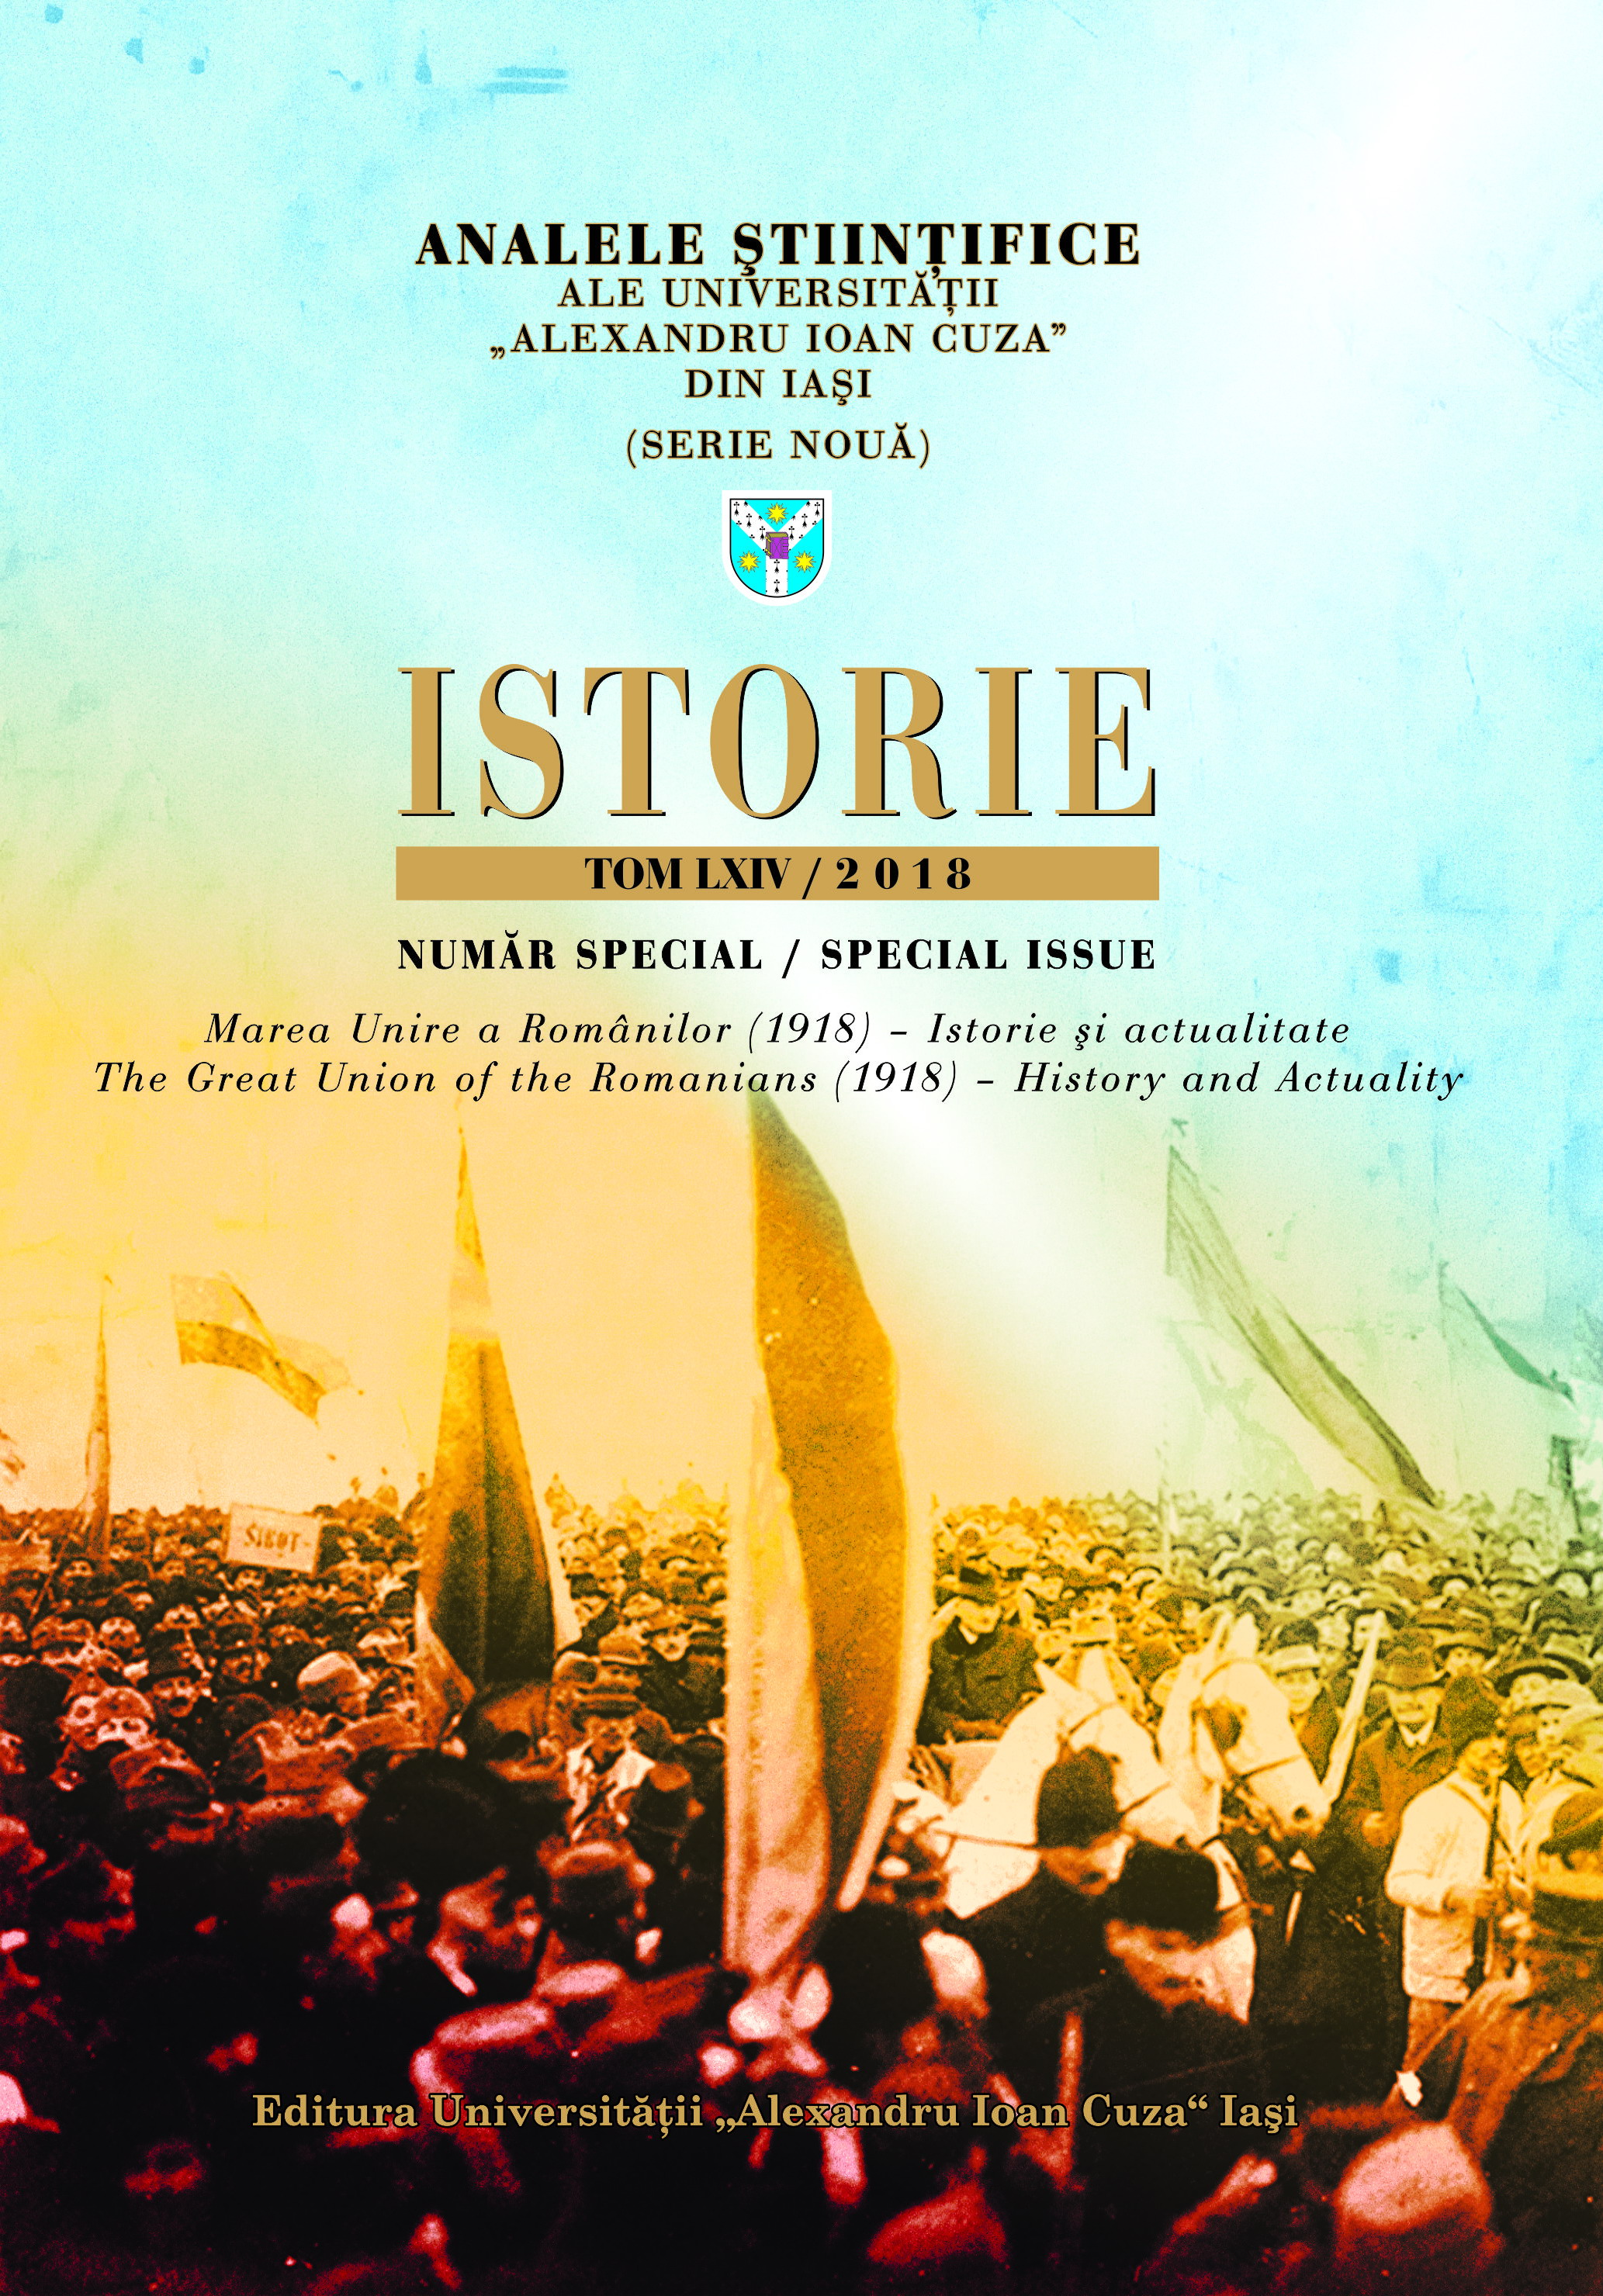 Ideological-historiographical distortions of Romania’s participation in the First World War in Romania of the 50s Cover Image